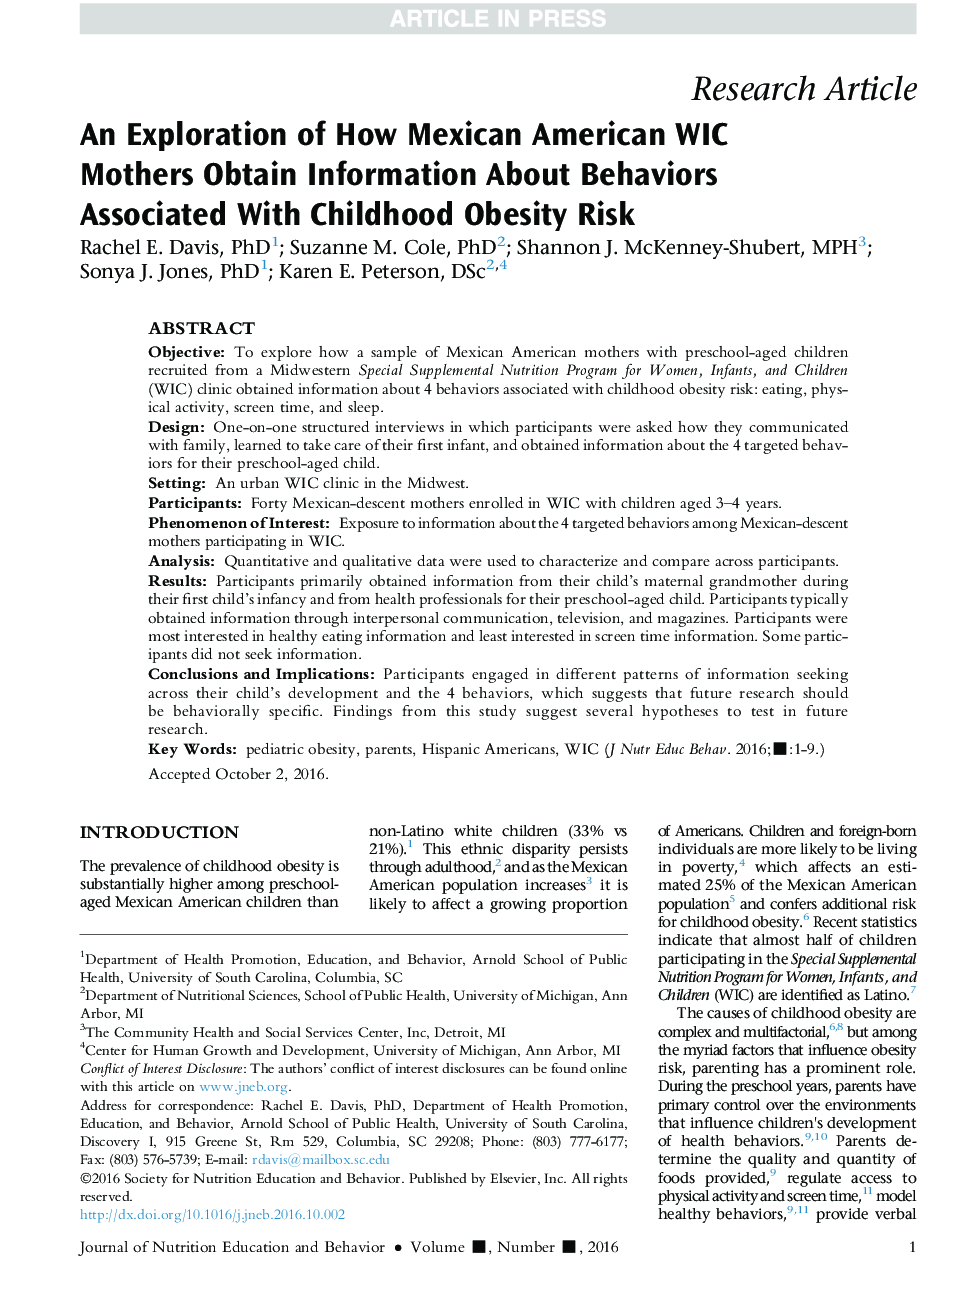 An Exploration of How Mexican American WIC Mothers Obtain Information About Behaviors Associated With Childhood Obesity Risk